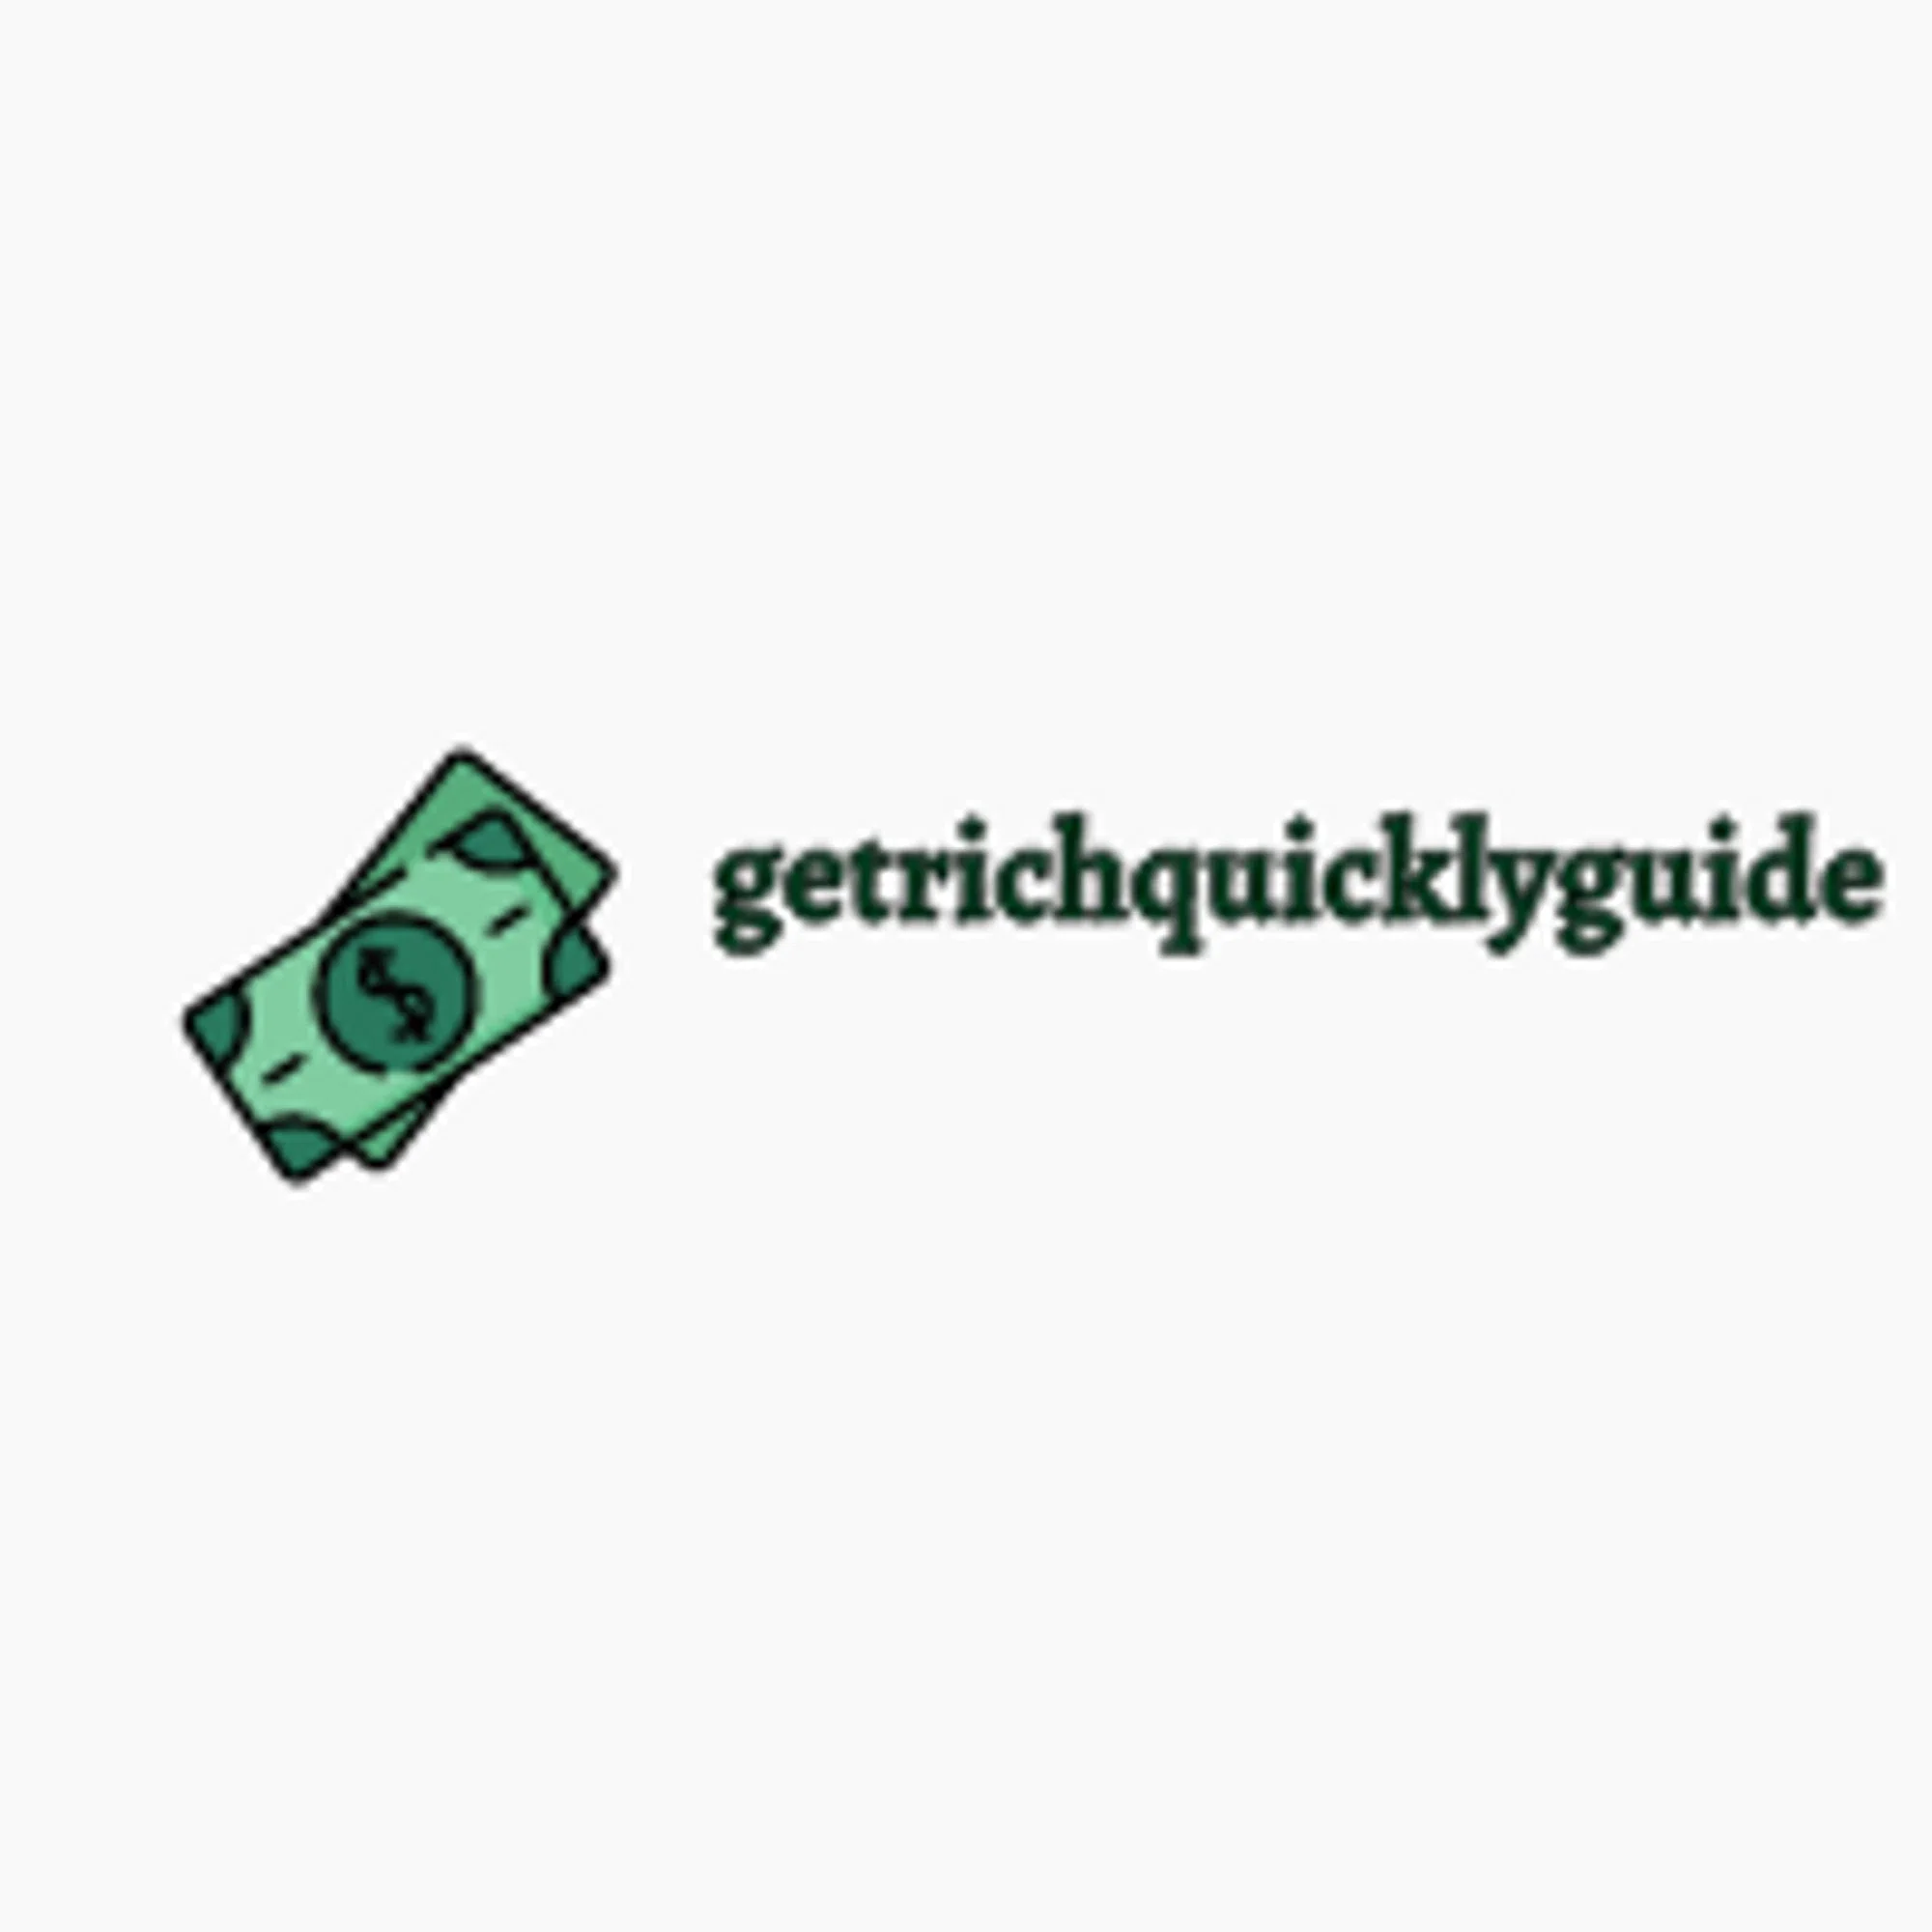 Getmoneyquicklyguide Promo Codes & Coupons